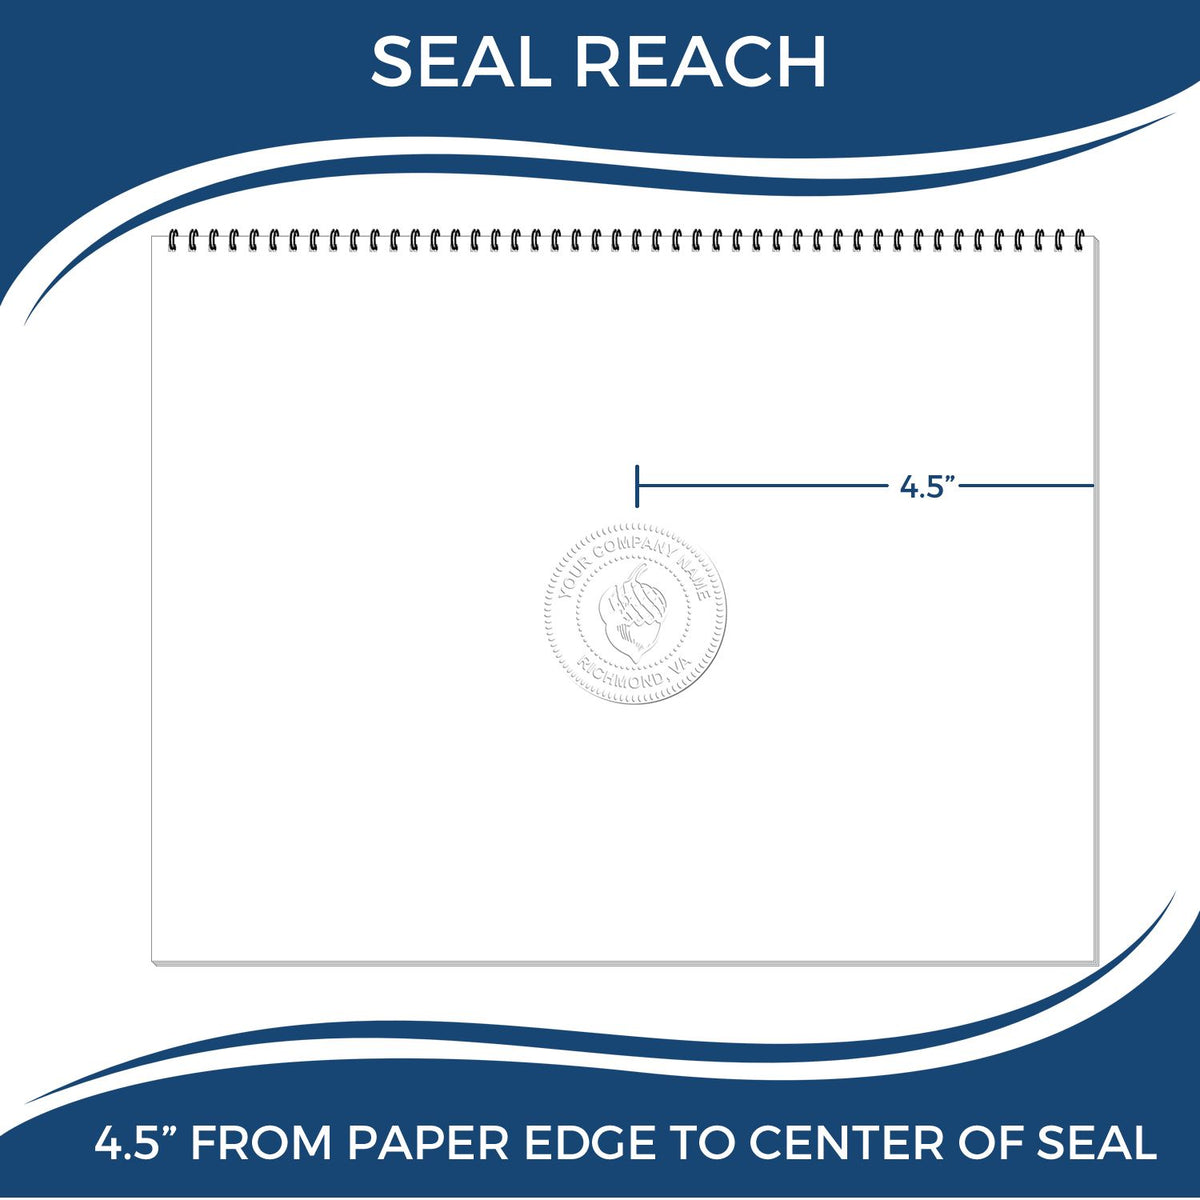 An infographic showing the seal reach which is represented by a ruler and a miniature seal image of the Extended Long Reach Nevada Surveyor Embosser